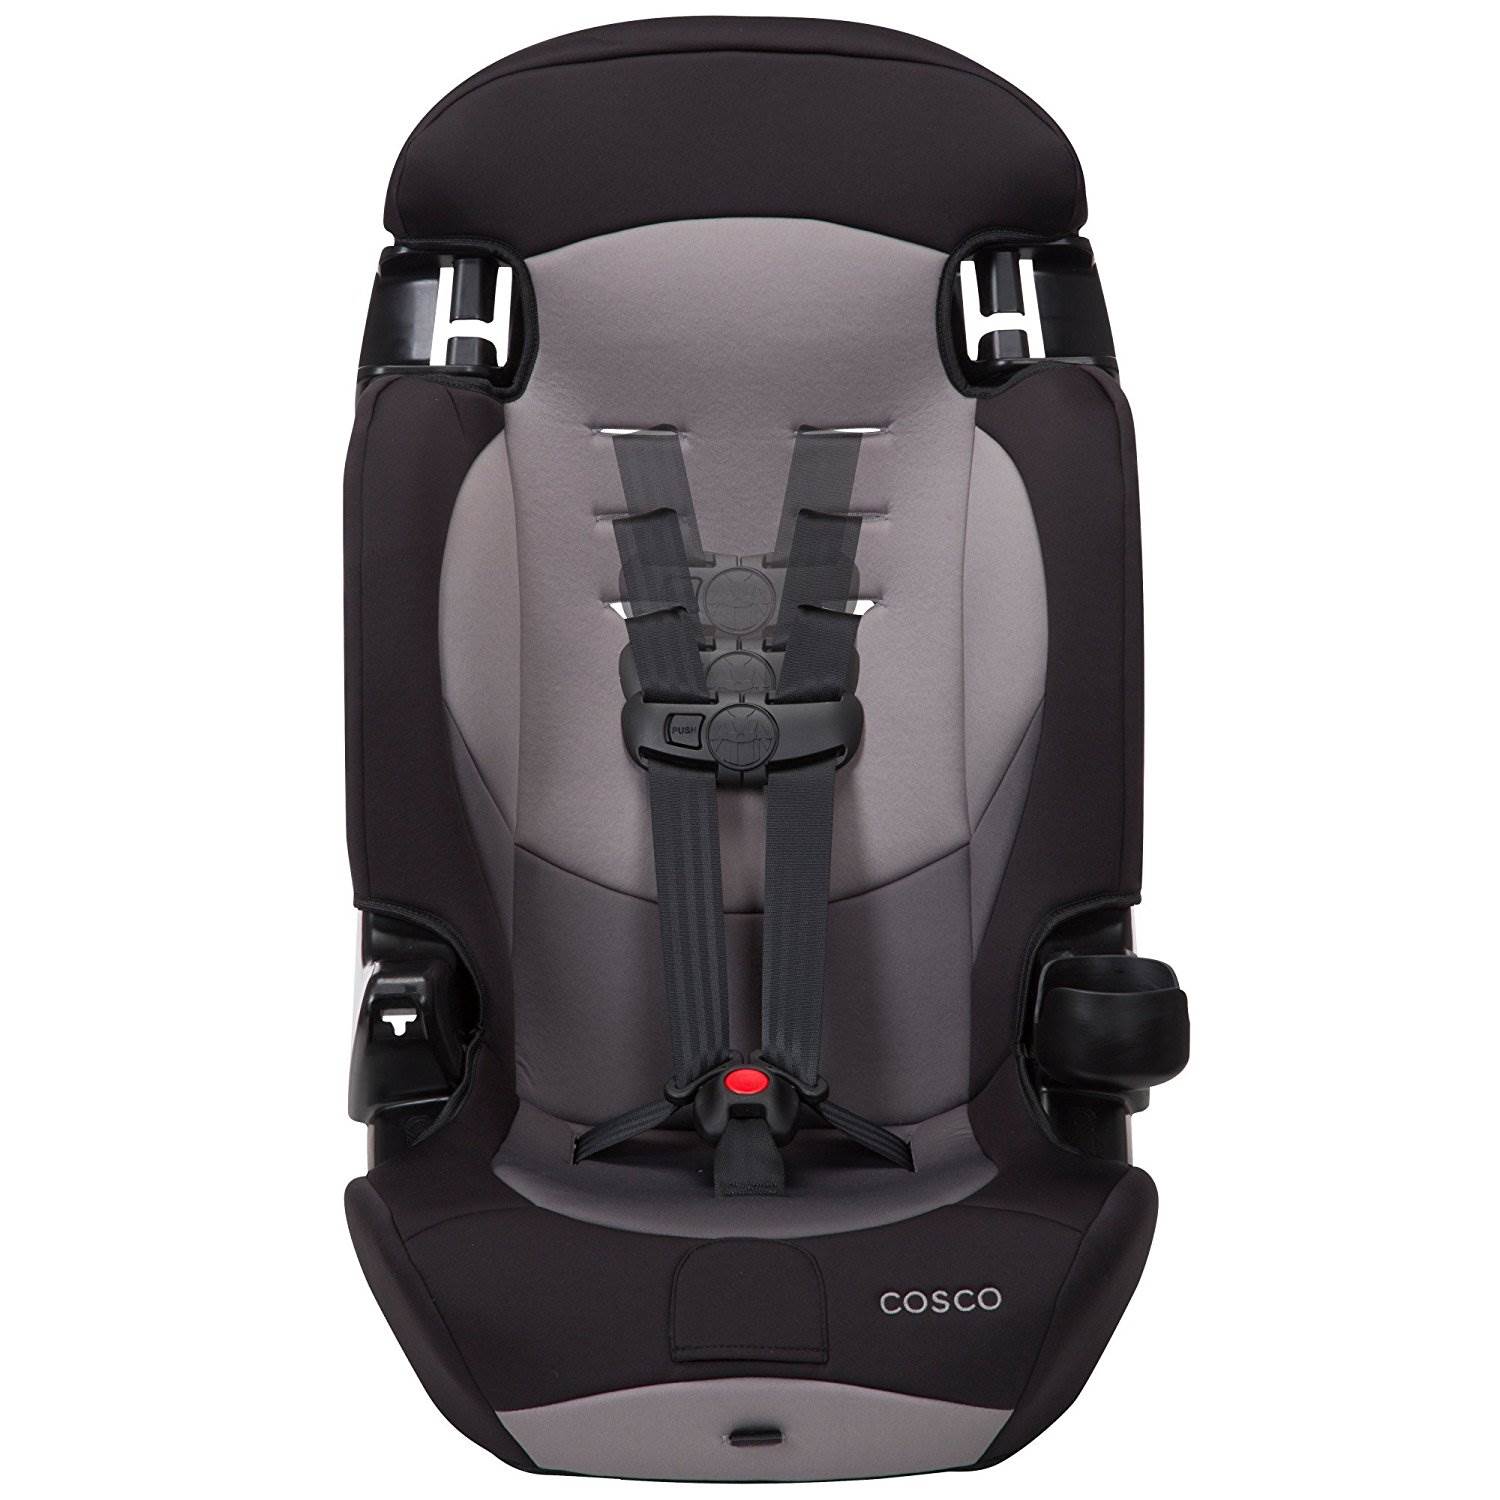 Cosco Finale DX 2-in-1 Booster Car Seat, Dusk - image 3 of 7